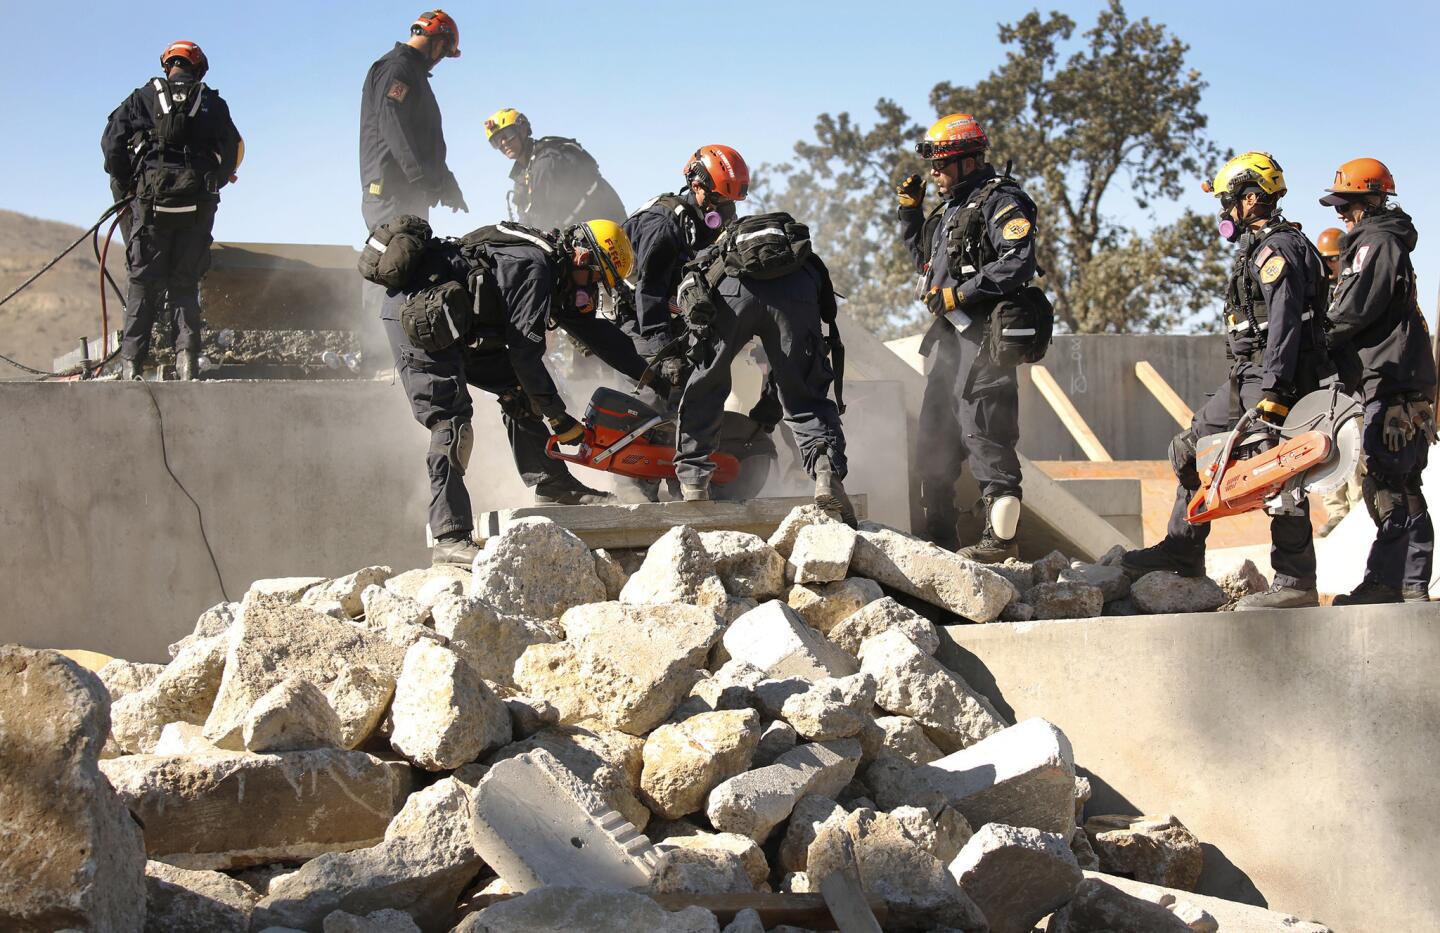 Los Angeles County Fire Department Urban Search and Rescue team members work to locate and extricate victims during a massive earthquake-response exercise hosted by the California National Guard simulating the aftermath of a magnitude 7.8 earthquake.